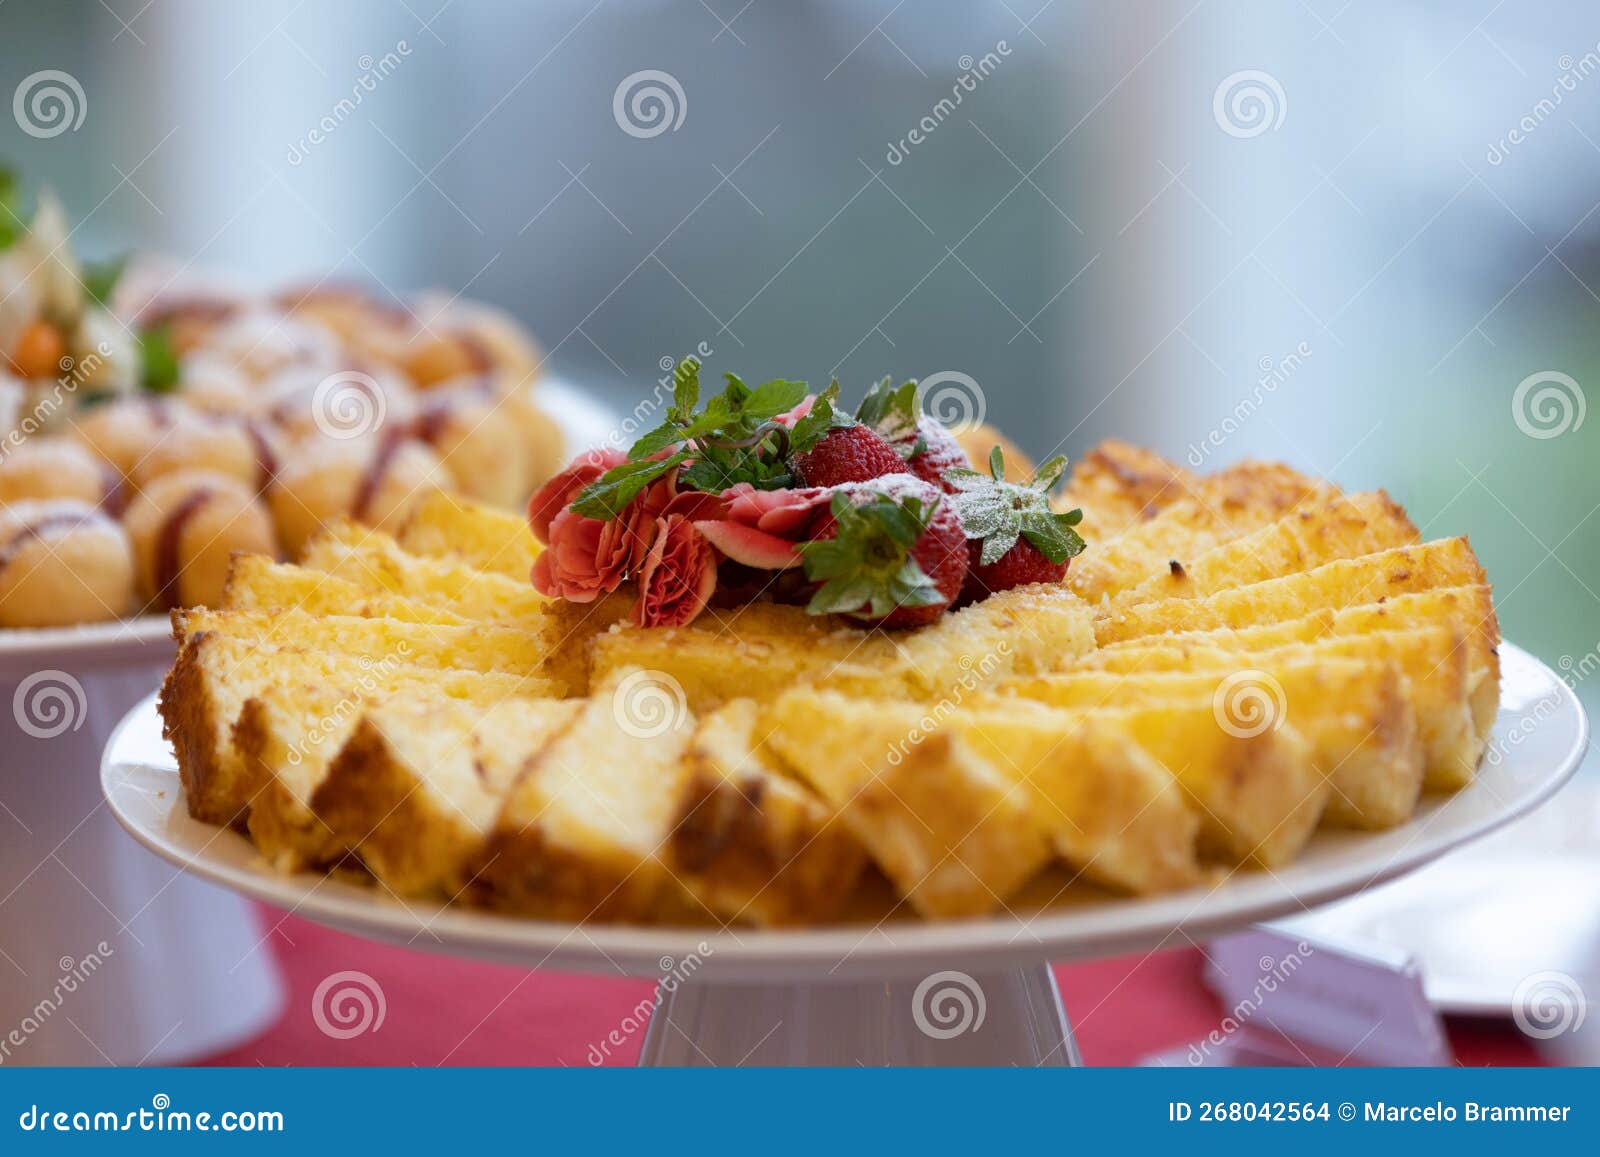 slices of cassava cake on a tray